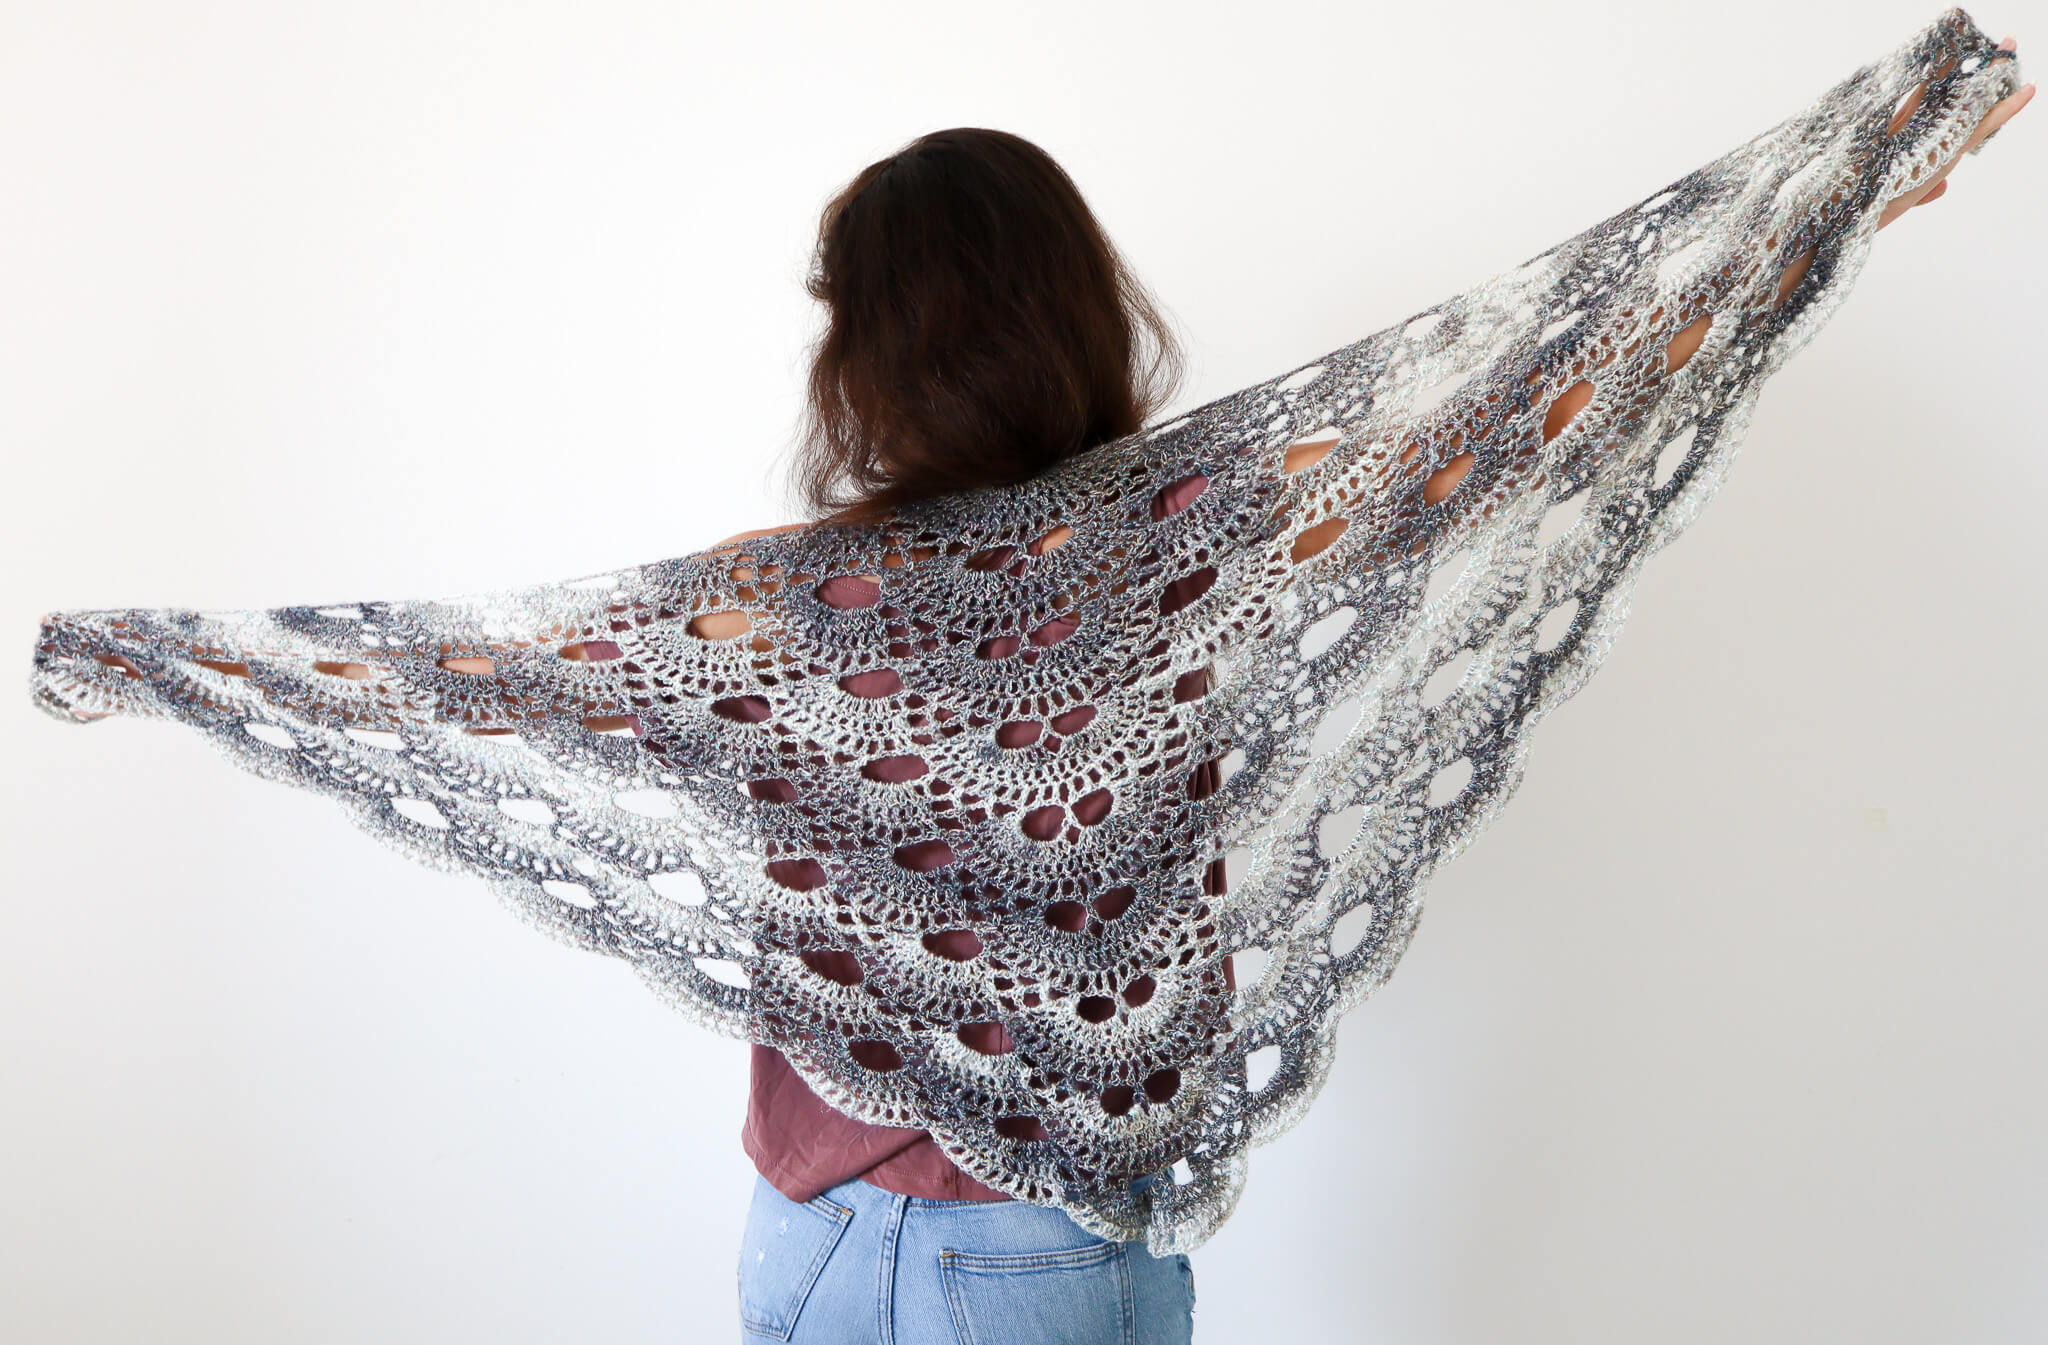 How To Crochet The Virus Shawl - The Snugglery